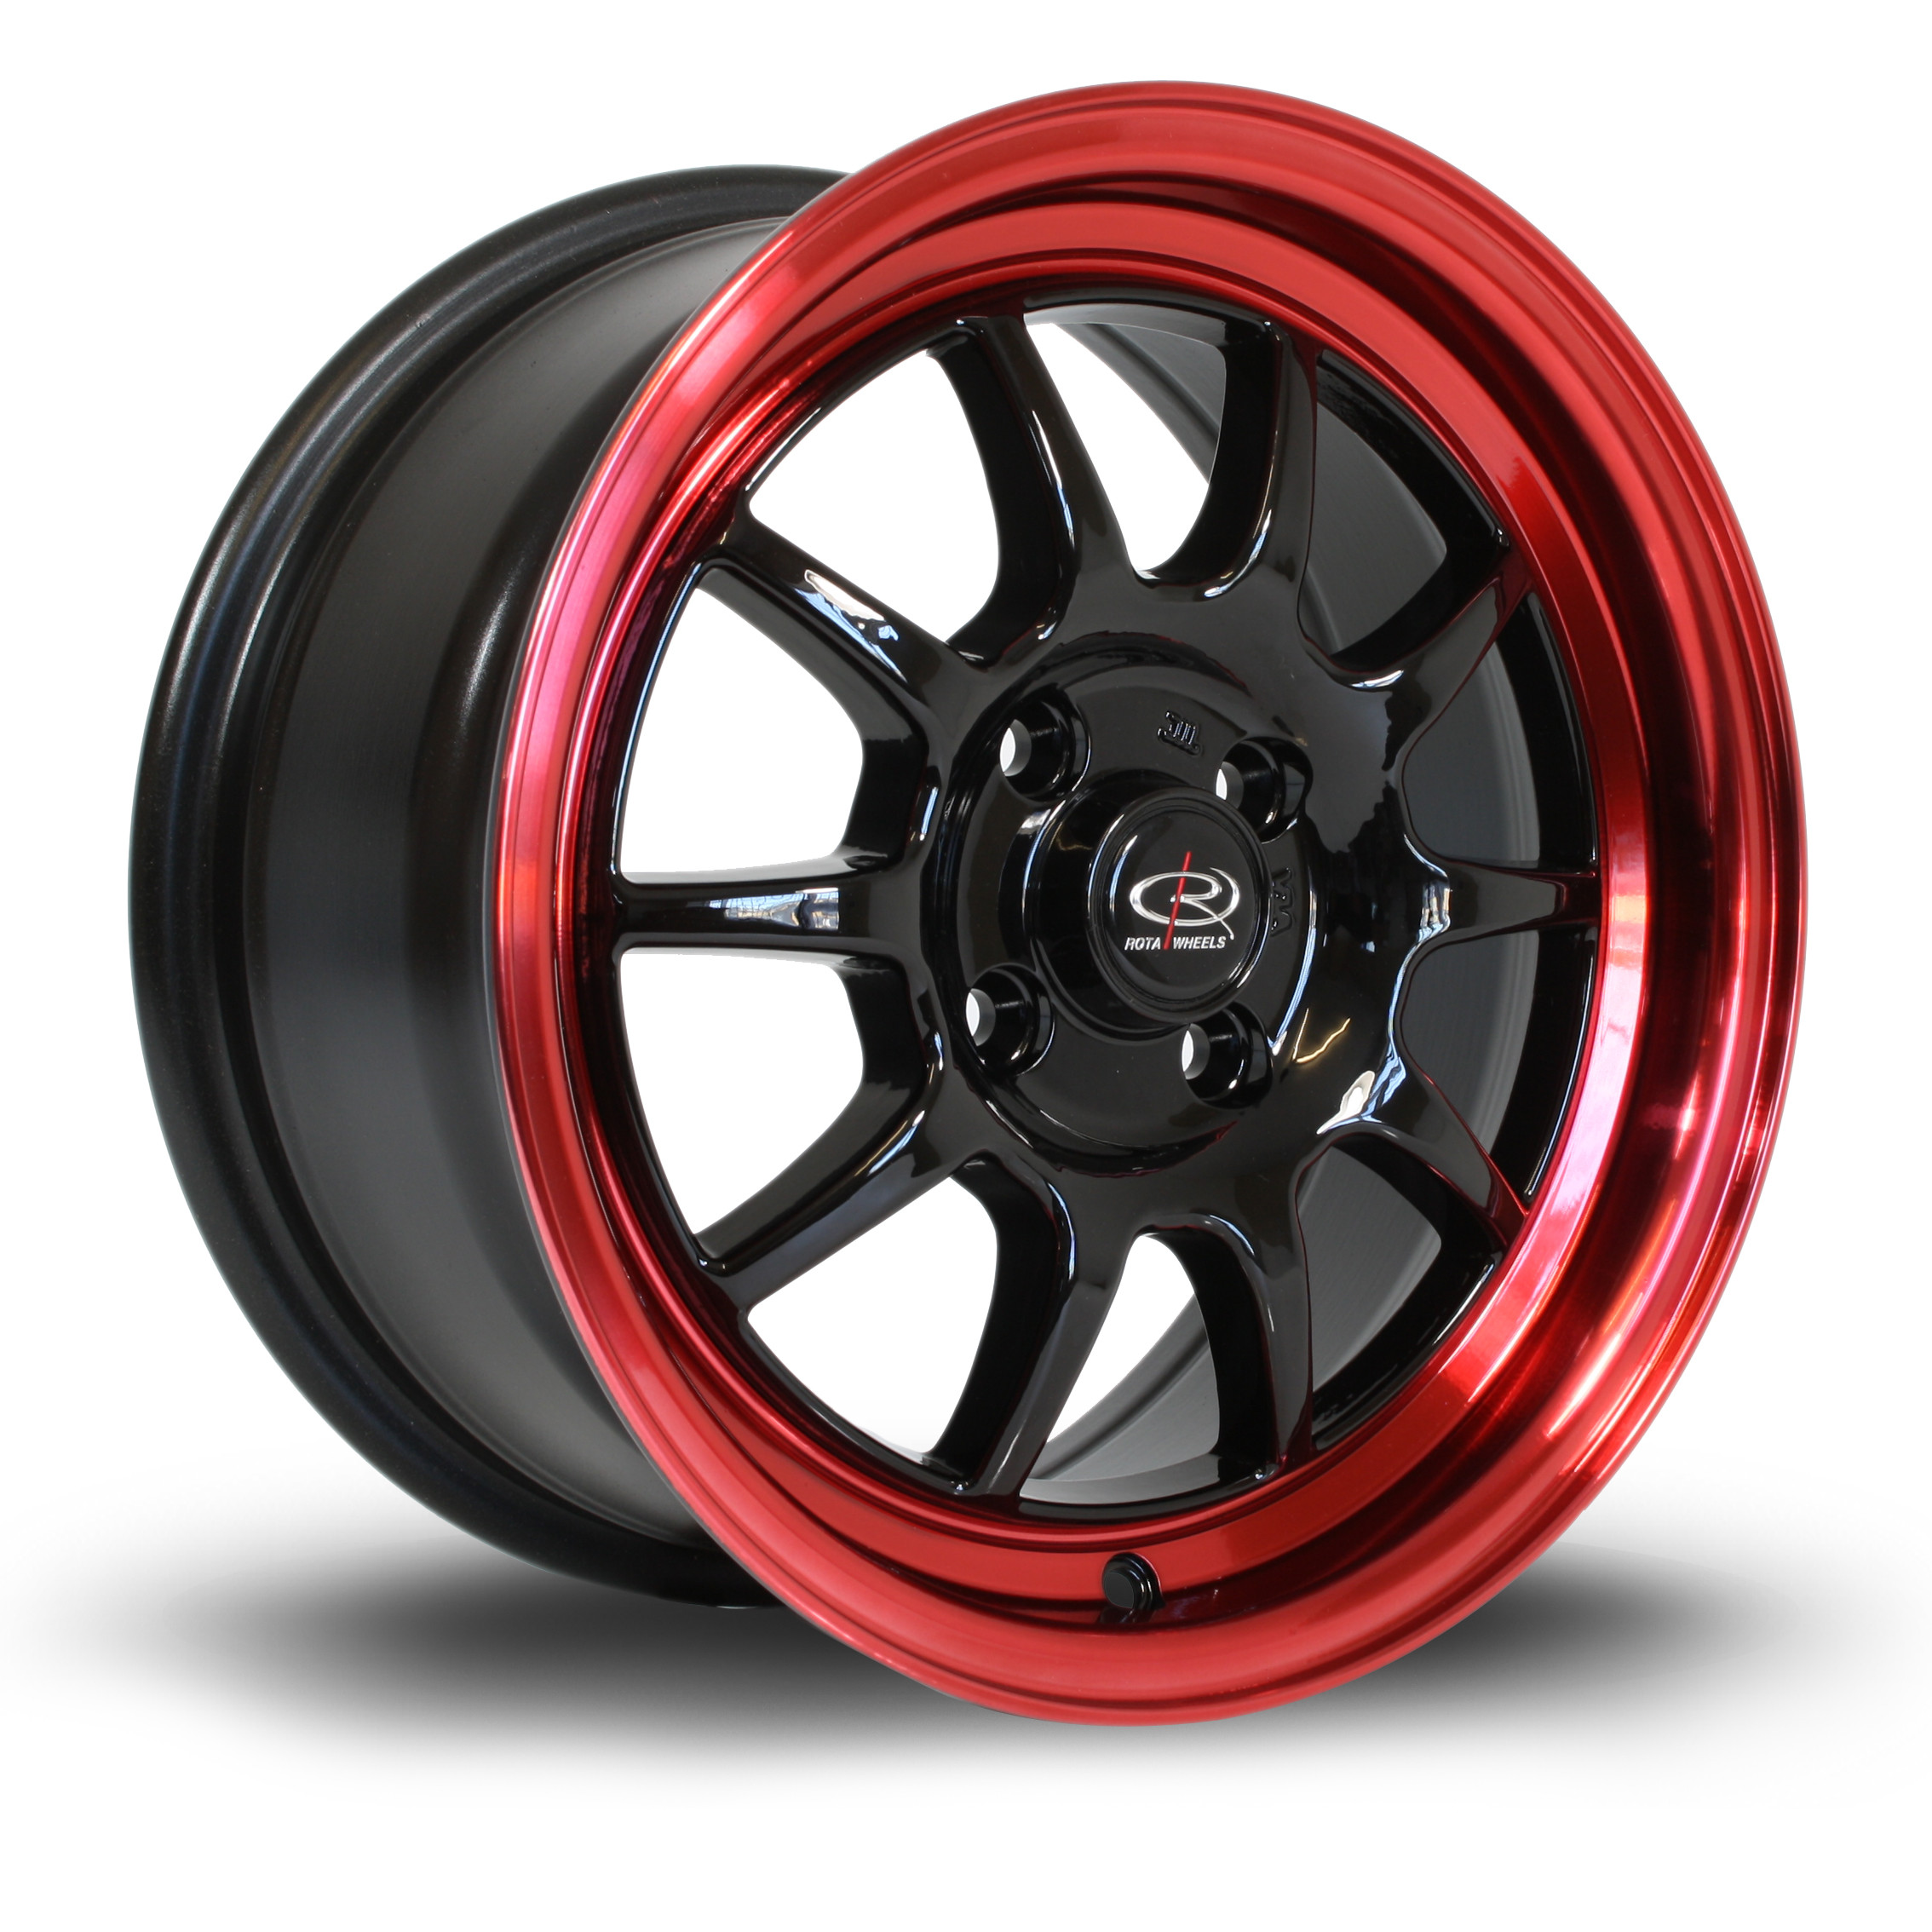 GT3 15x7 4x100 ET40 Gloss Black with Candy Red Lip